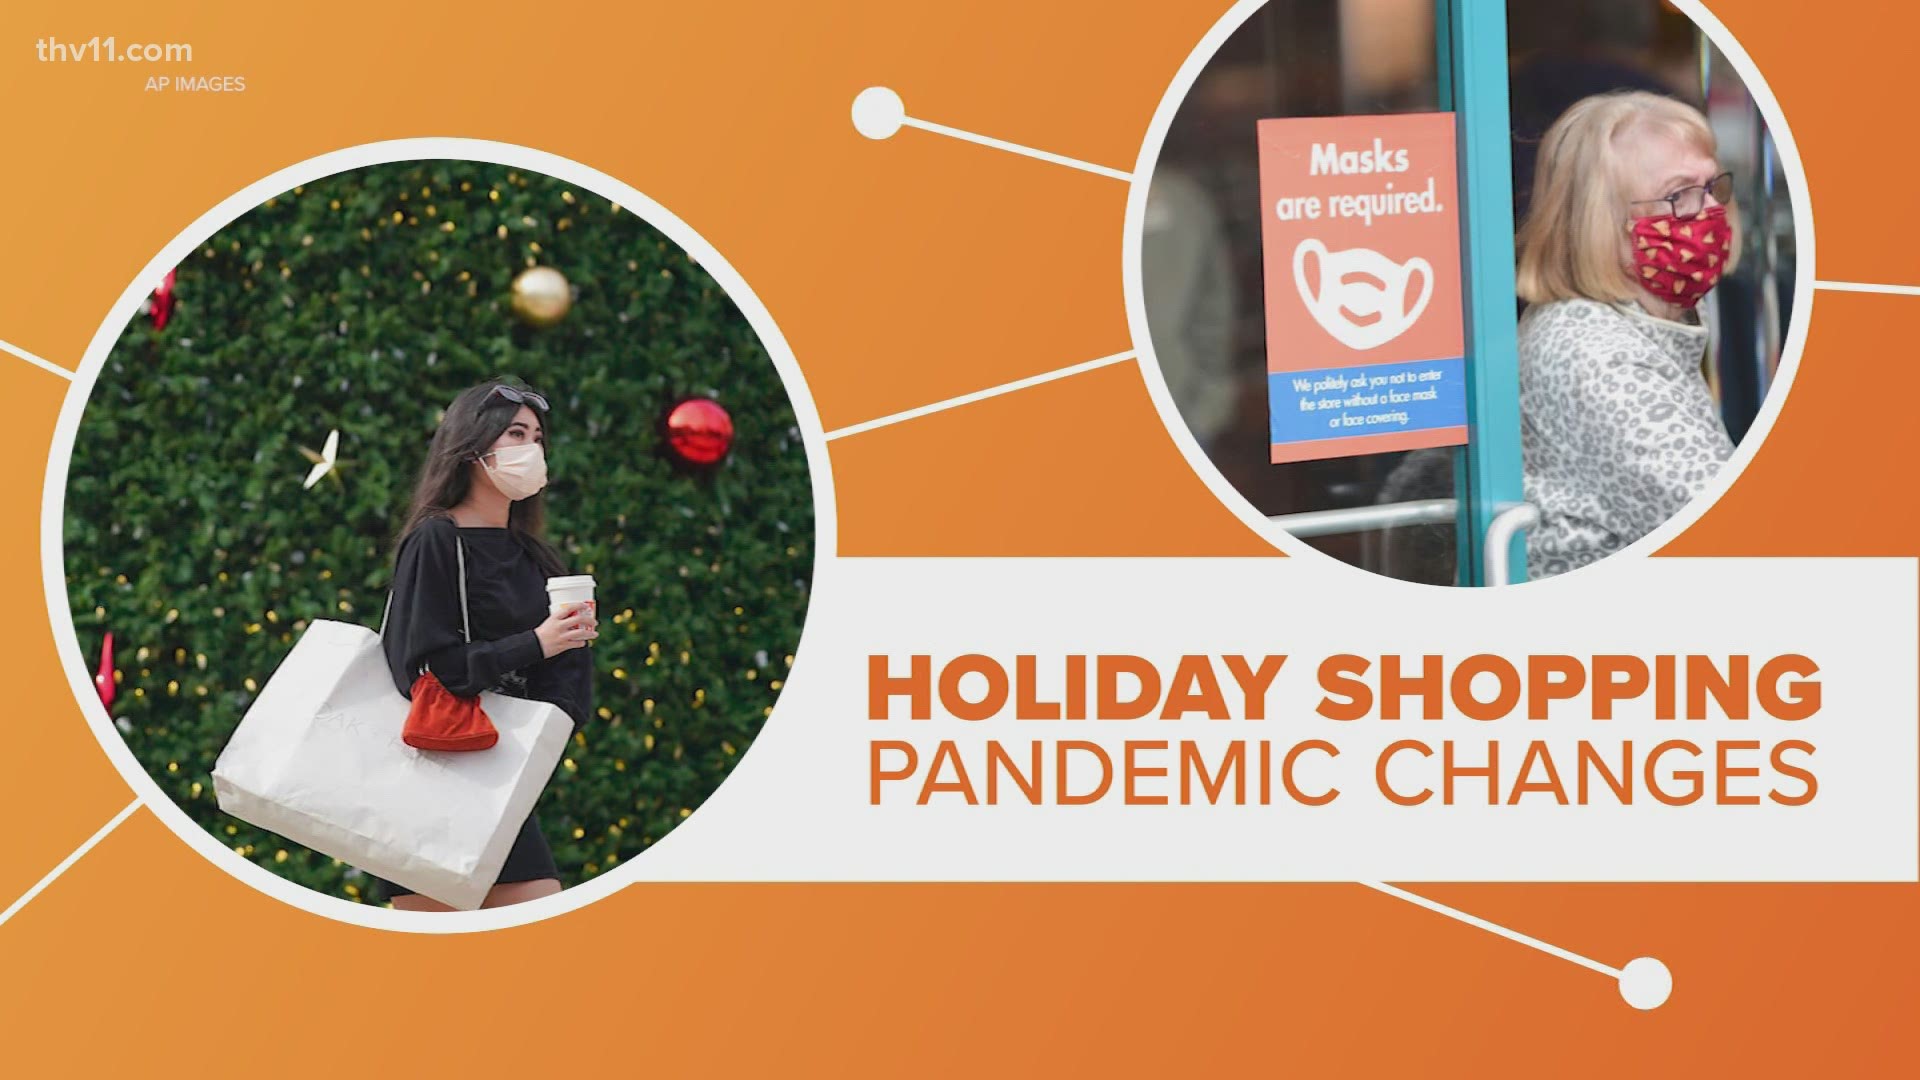 The pandemic is causing some interesting changes to Black Friday shopping. From the hours, to the inventory, to how much people are spending.